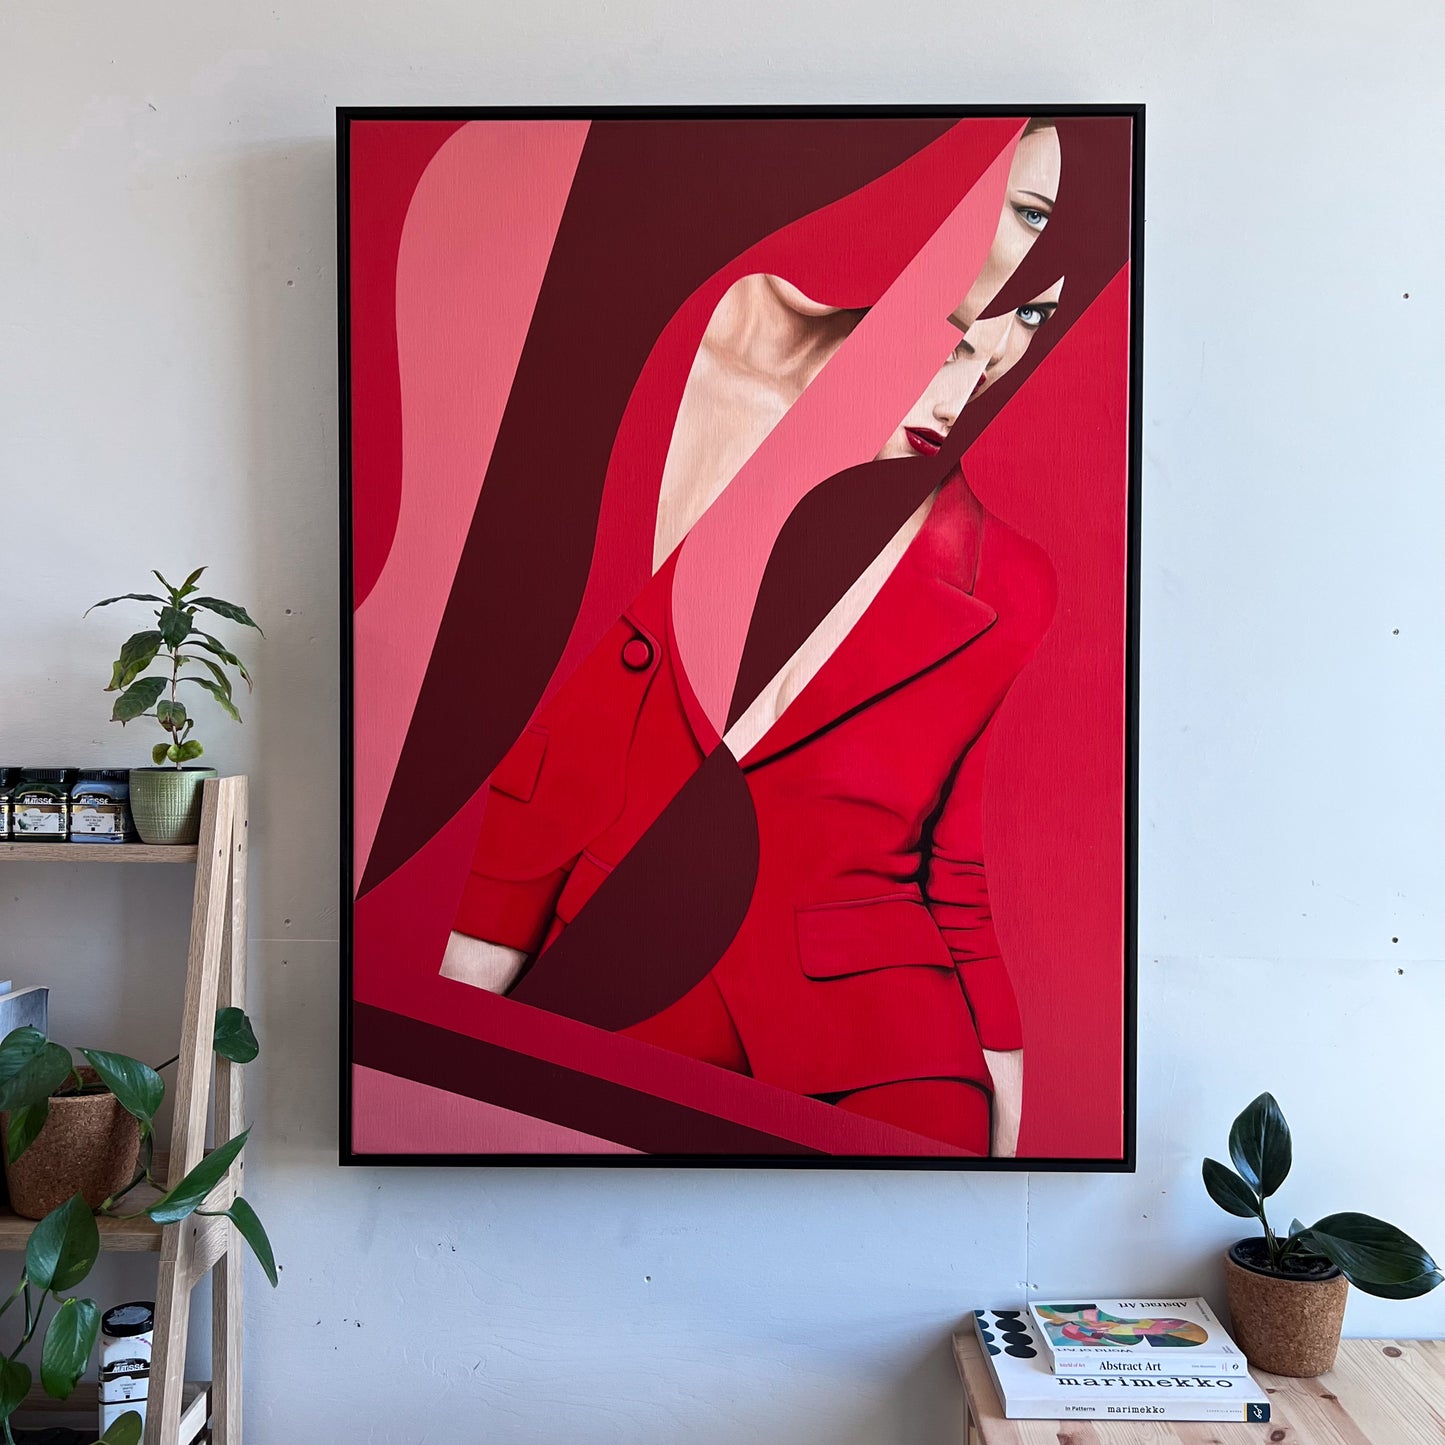 modern framed abstract painting for sale red and burgundy